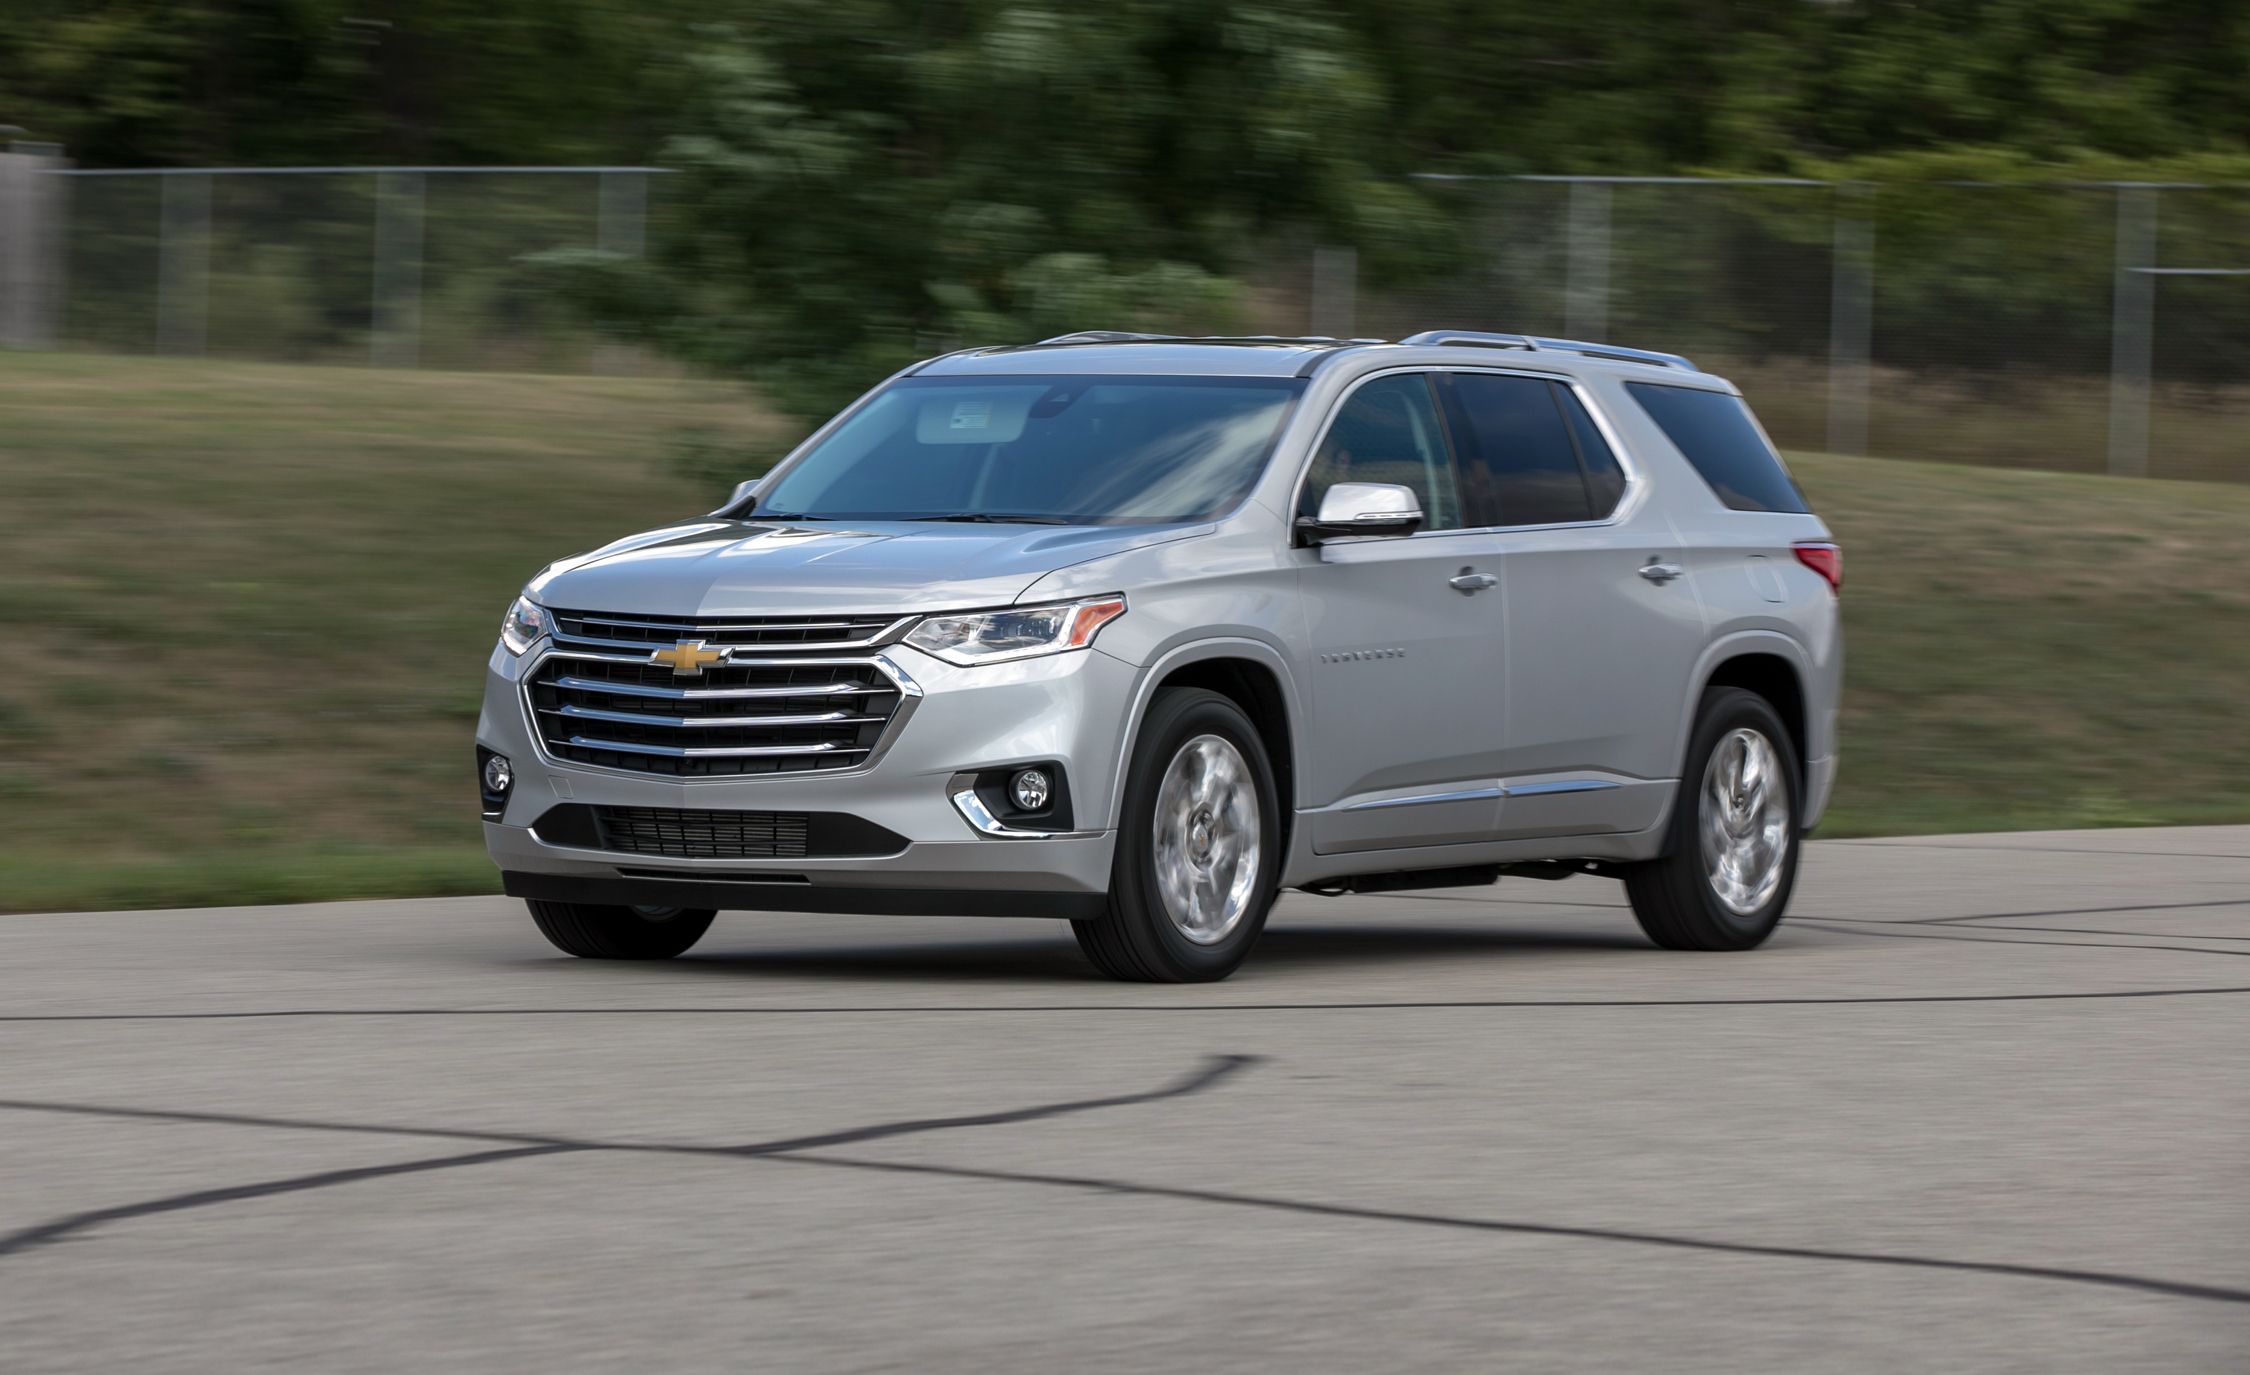 2018 Chevrolet Traverse Review, Pricing, and Specs